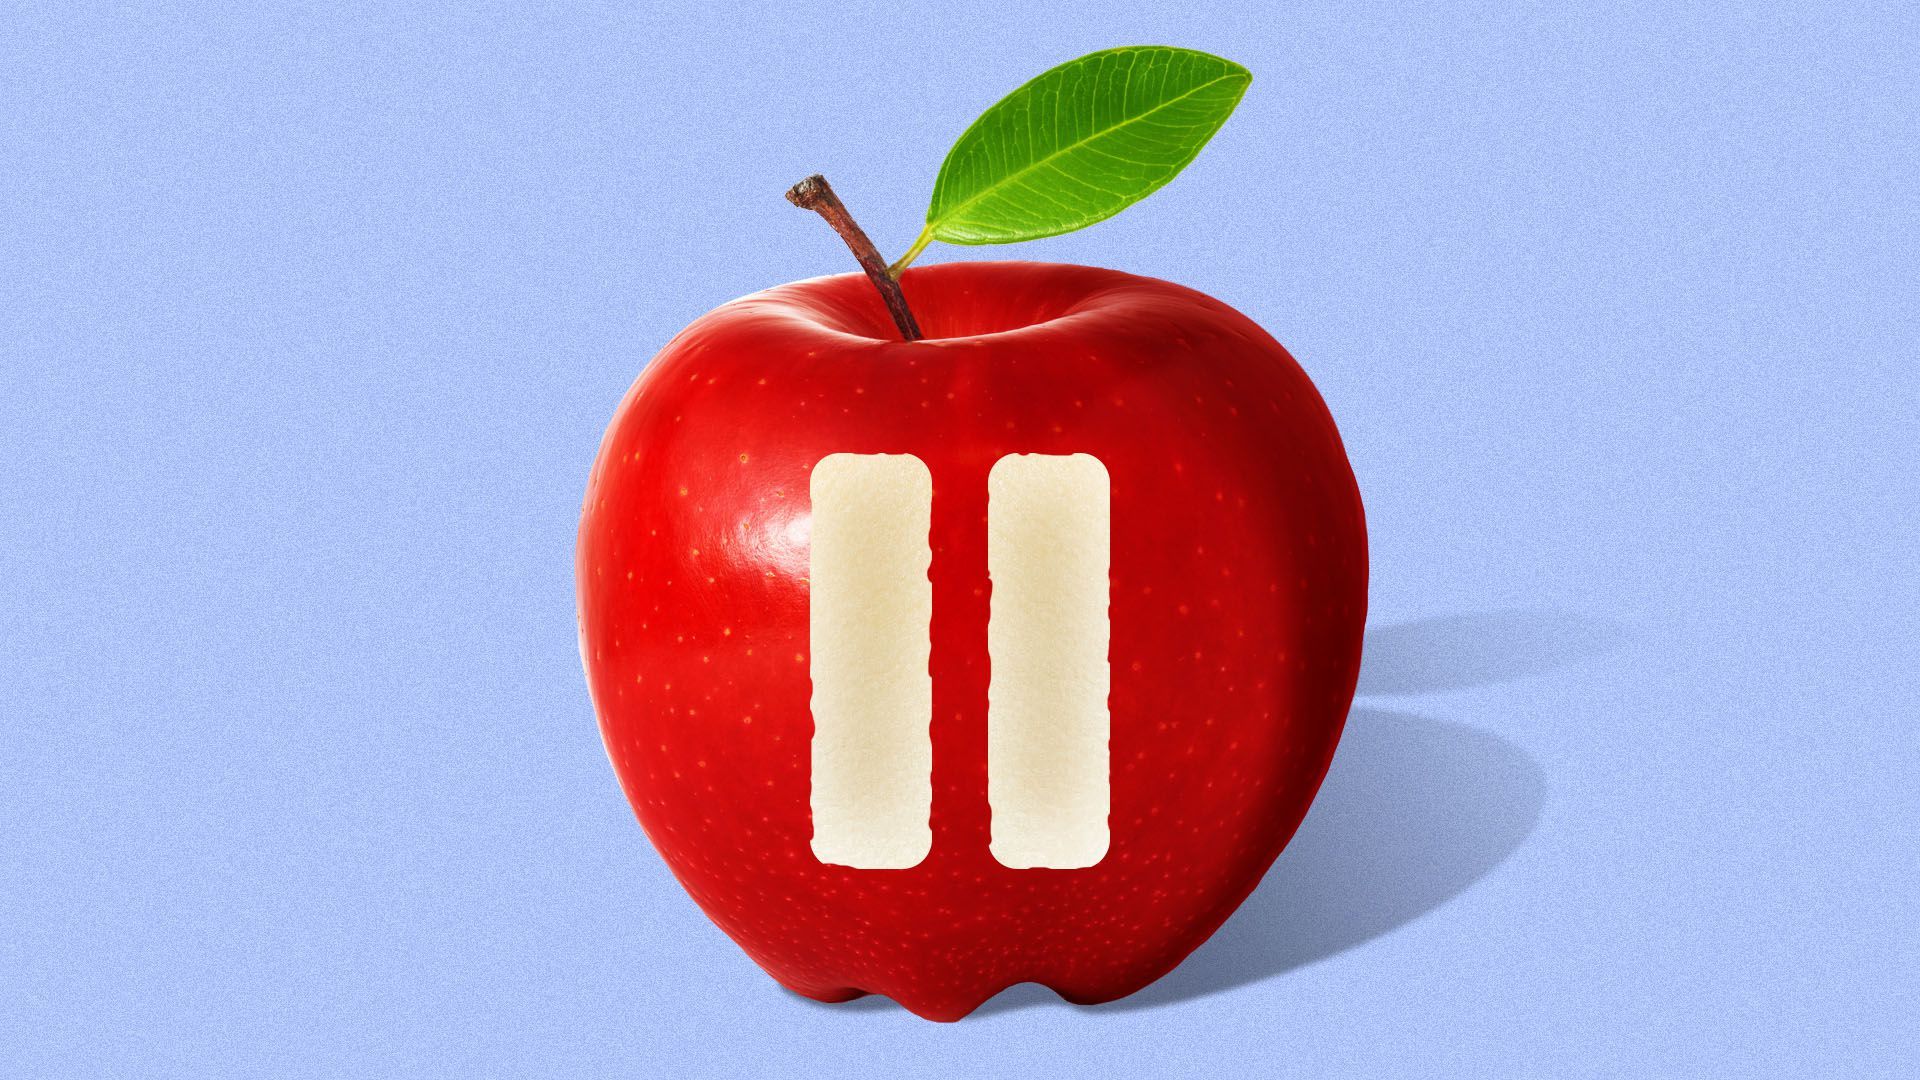 Illustration of an apple with two bites taken out of it in the shape of a pause button